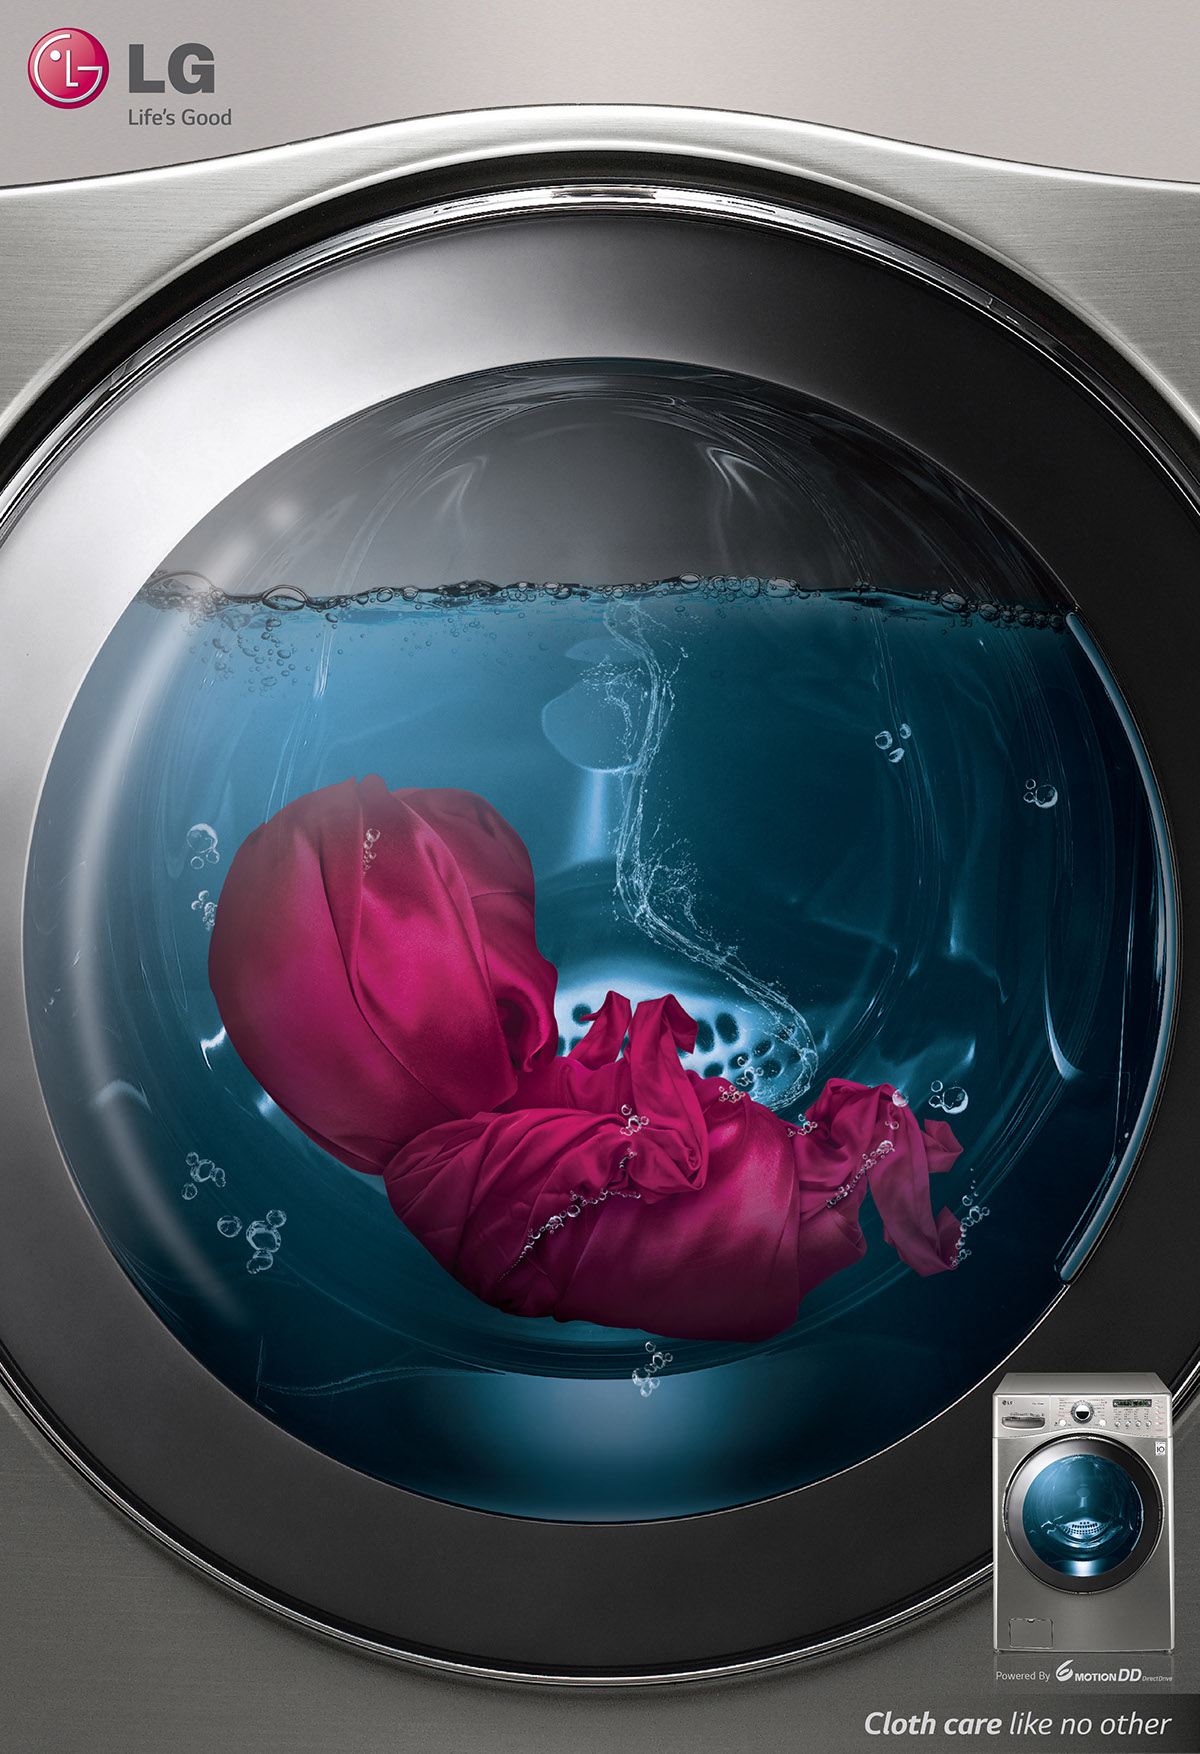 LG Washing Machine lg 6 Motion Direct drive cloth care mother care ad